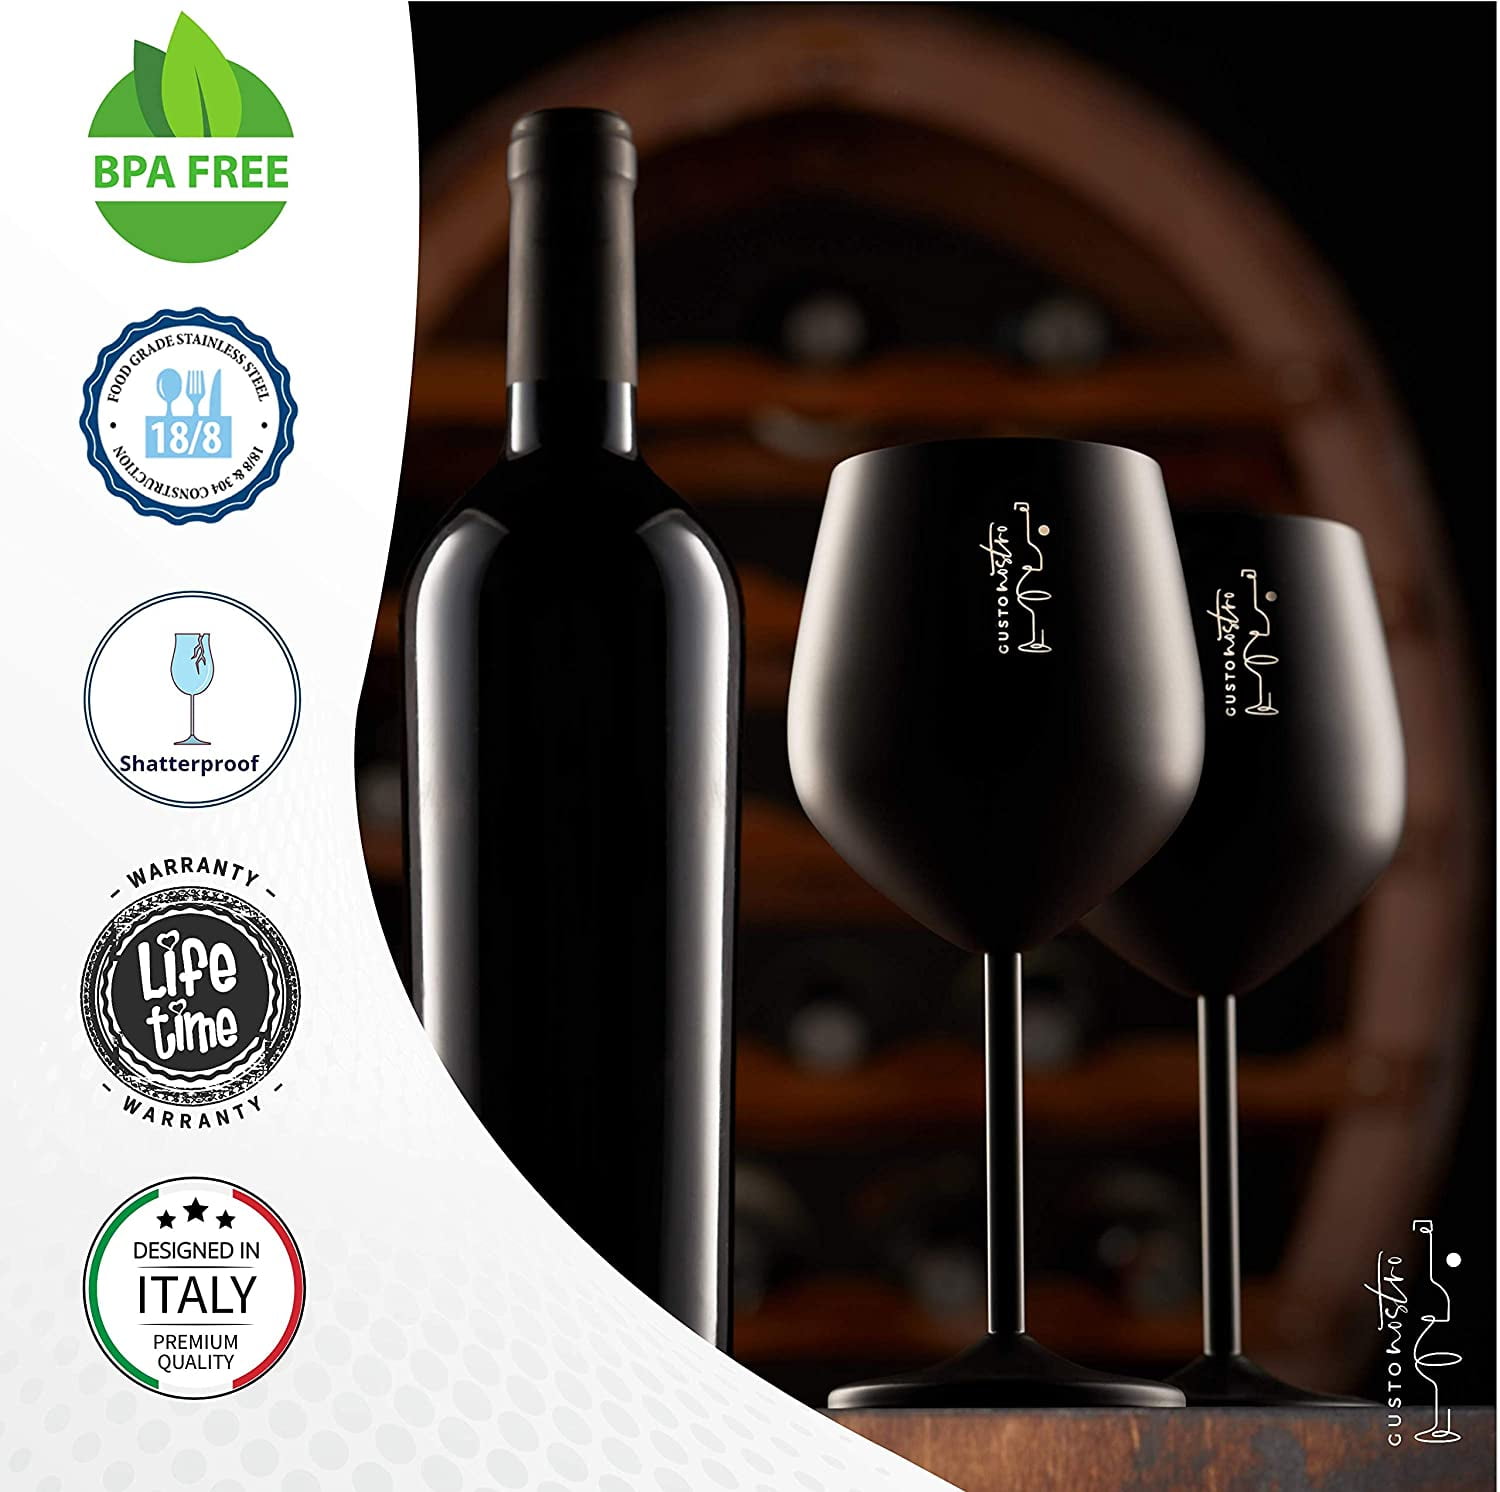 Stainless Steel Wine Glass - Cute, Unbreakable Wine Glasses For Travel,  Camping And Pool - Fancy, Unique And Cool Portable Metal Wine Glass For  Outdo